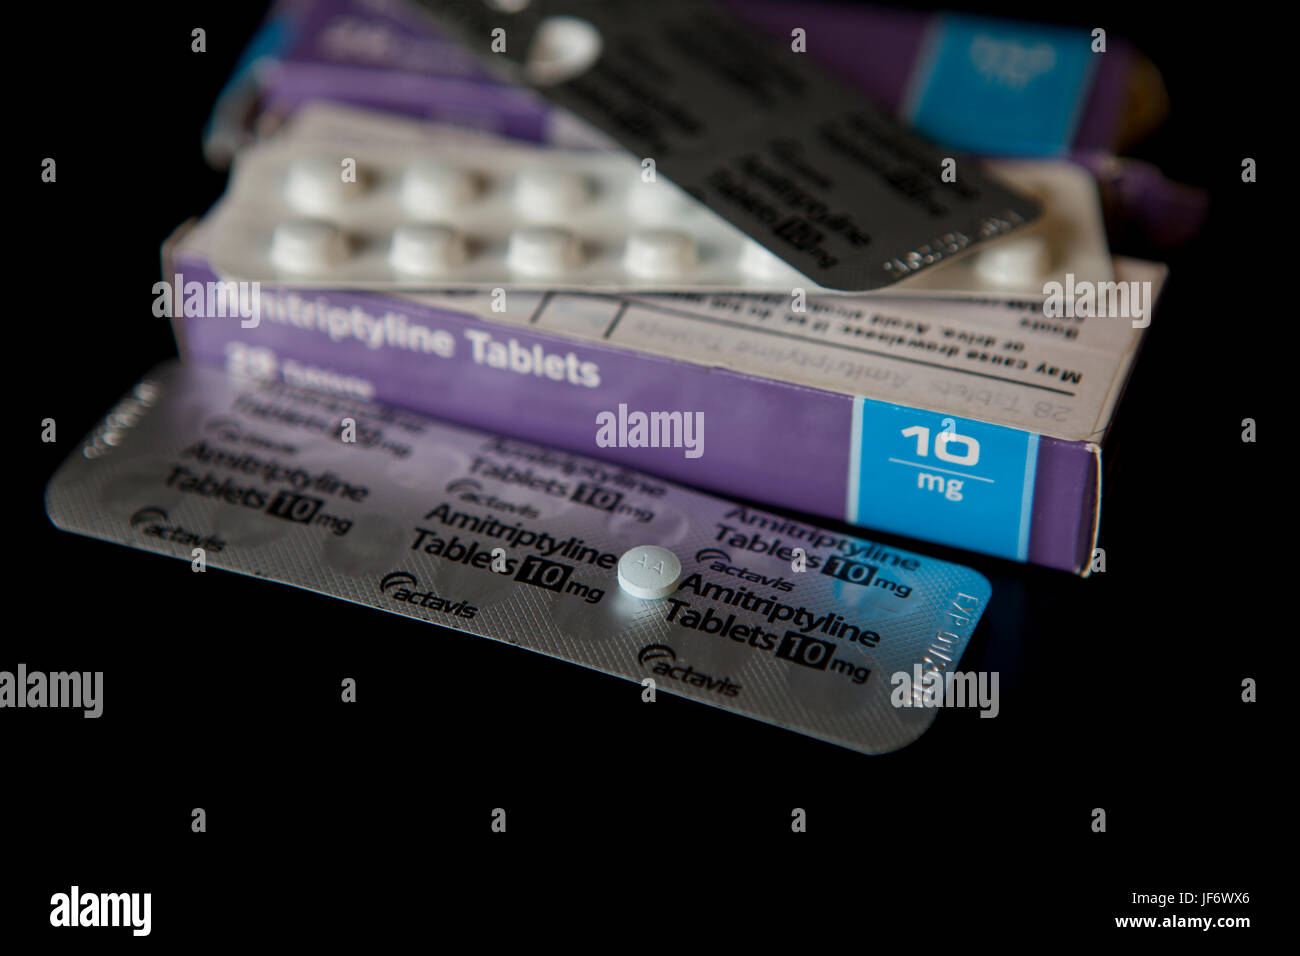 Amitriptyline is used to relieve the chronic pain of arthritis and related conditions. Stock Photo